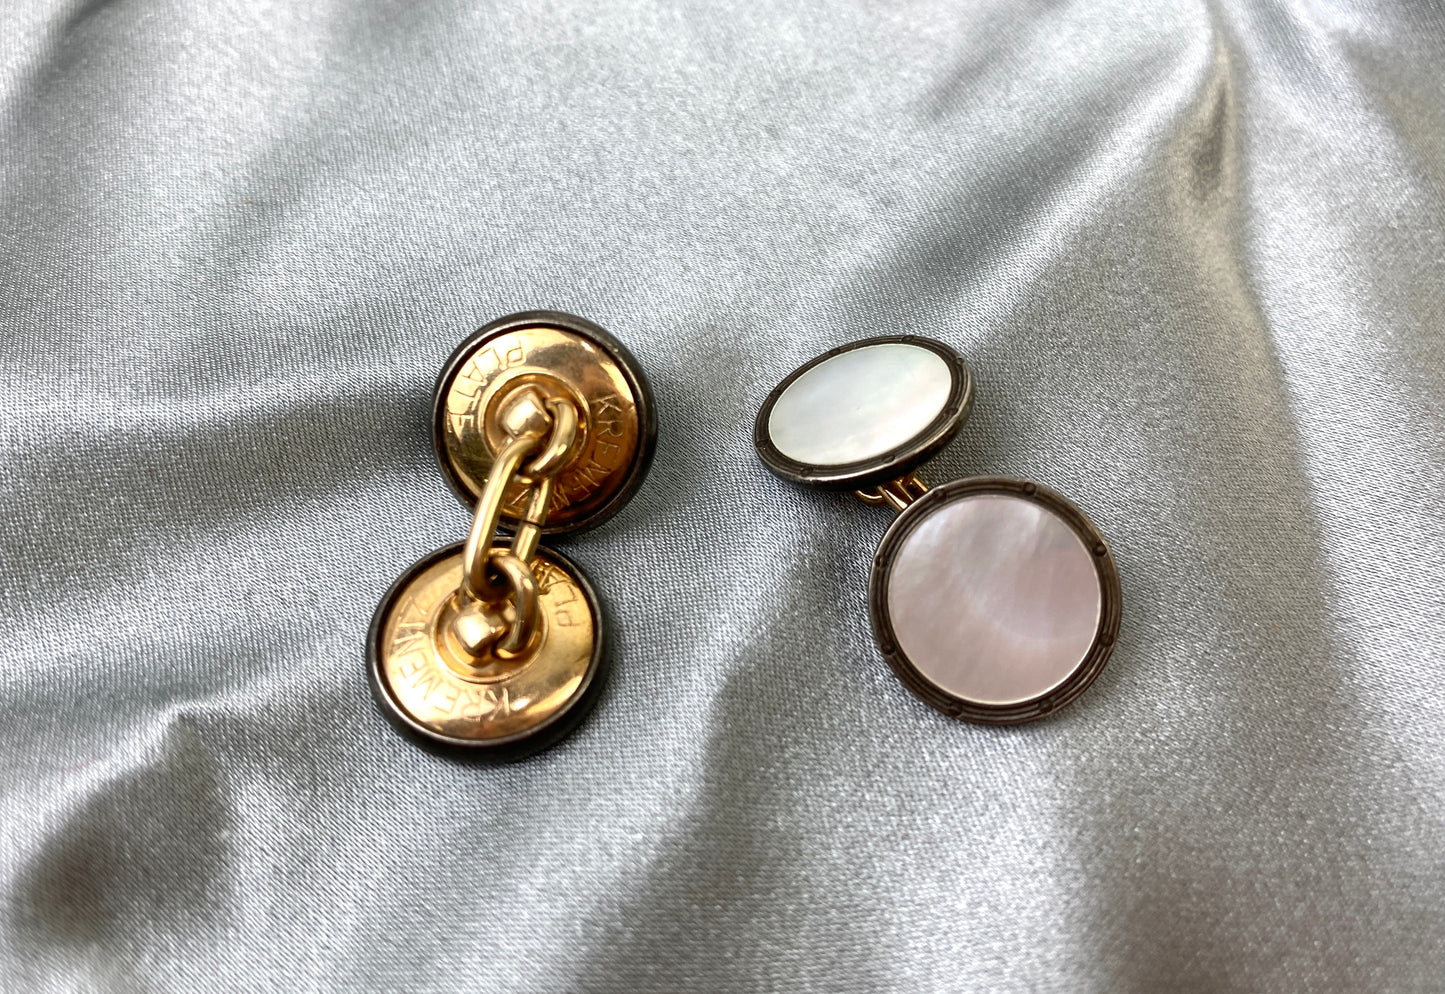 Vintage Edwardian 1910s Men's Round Cufflinks, Double-Sided Silver with Mother of Pearl Inlay, Krementz Gold Plated